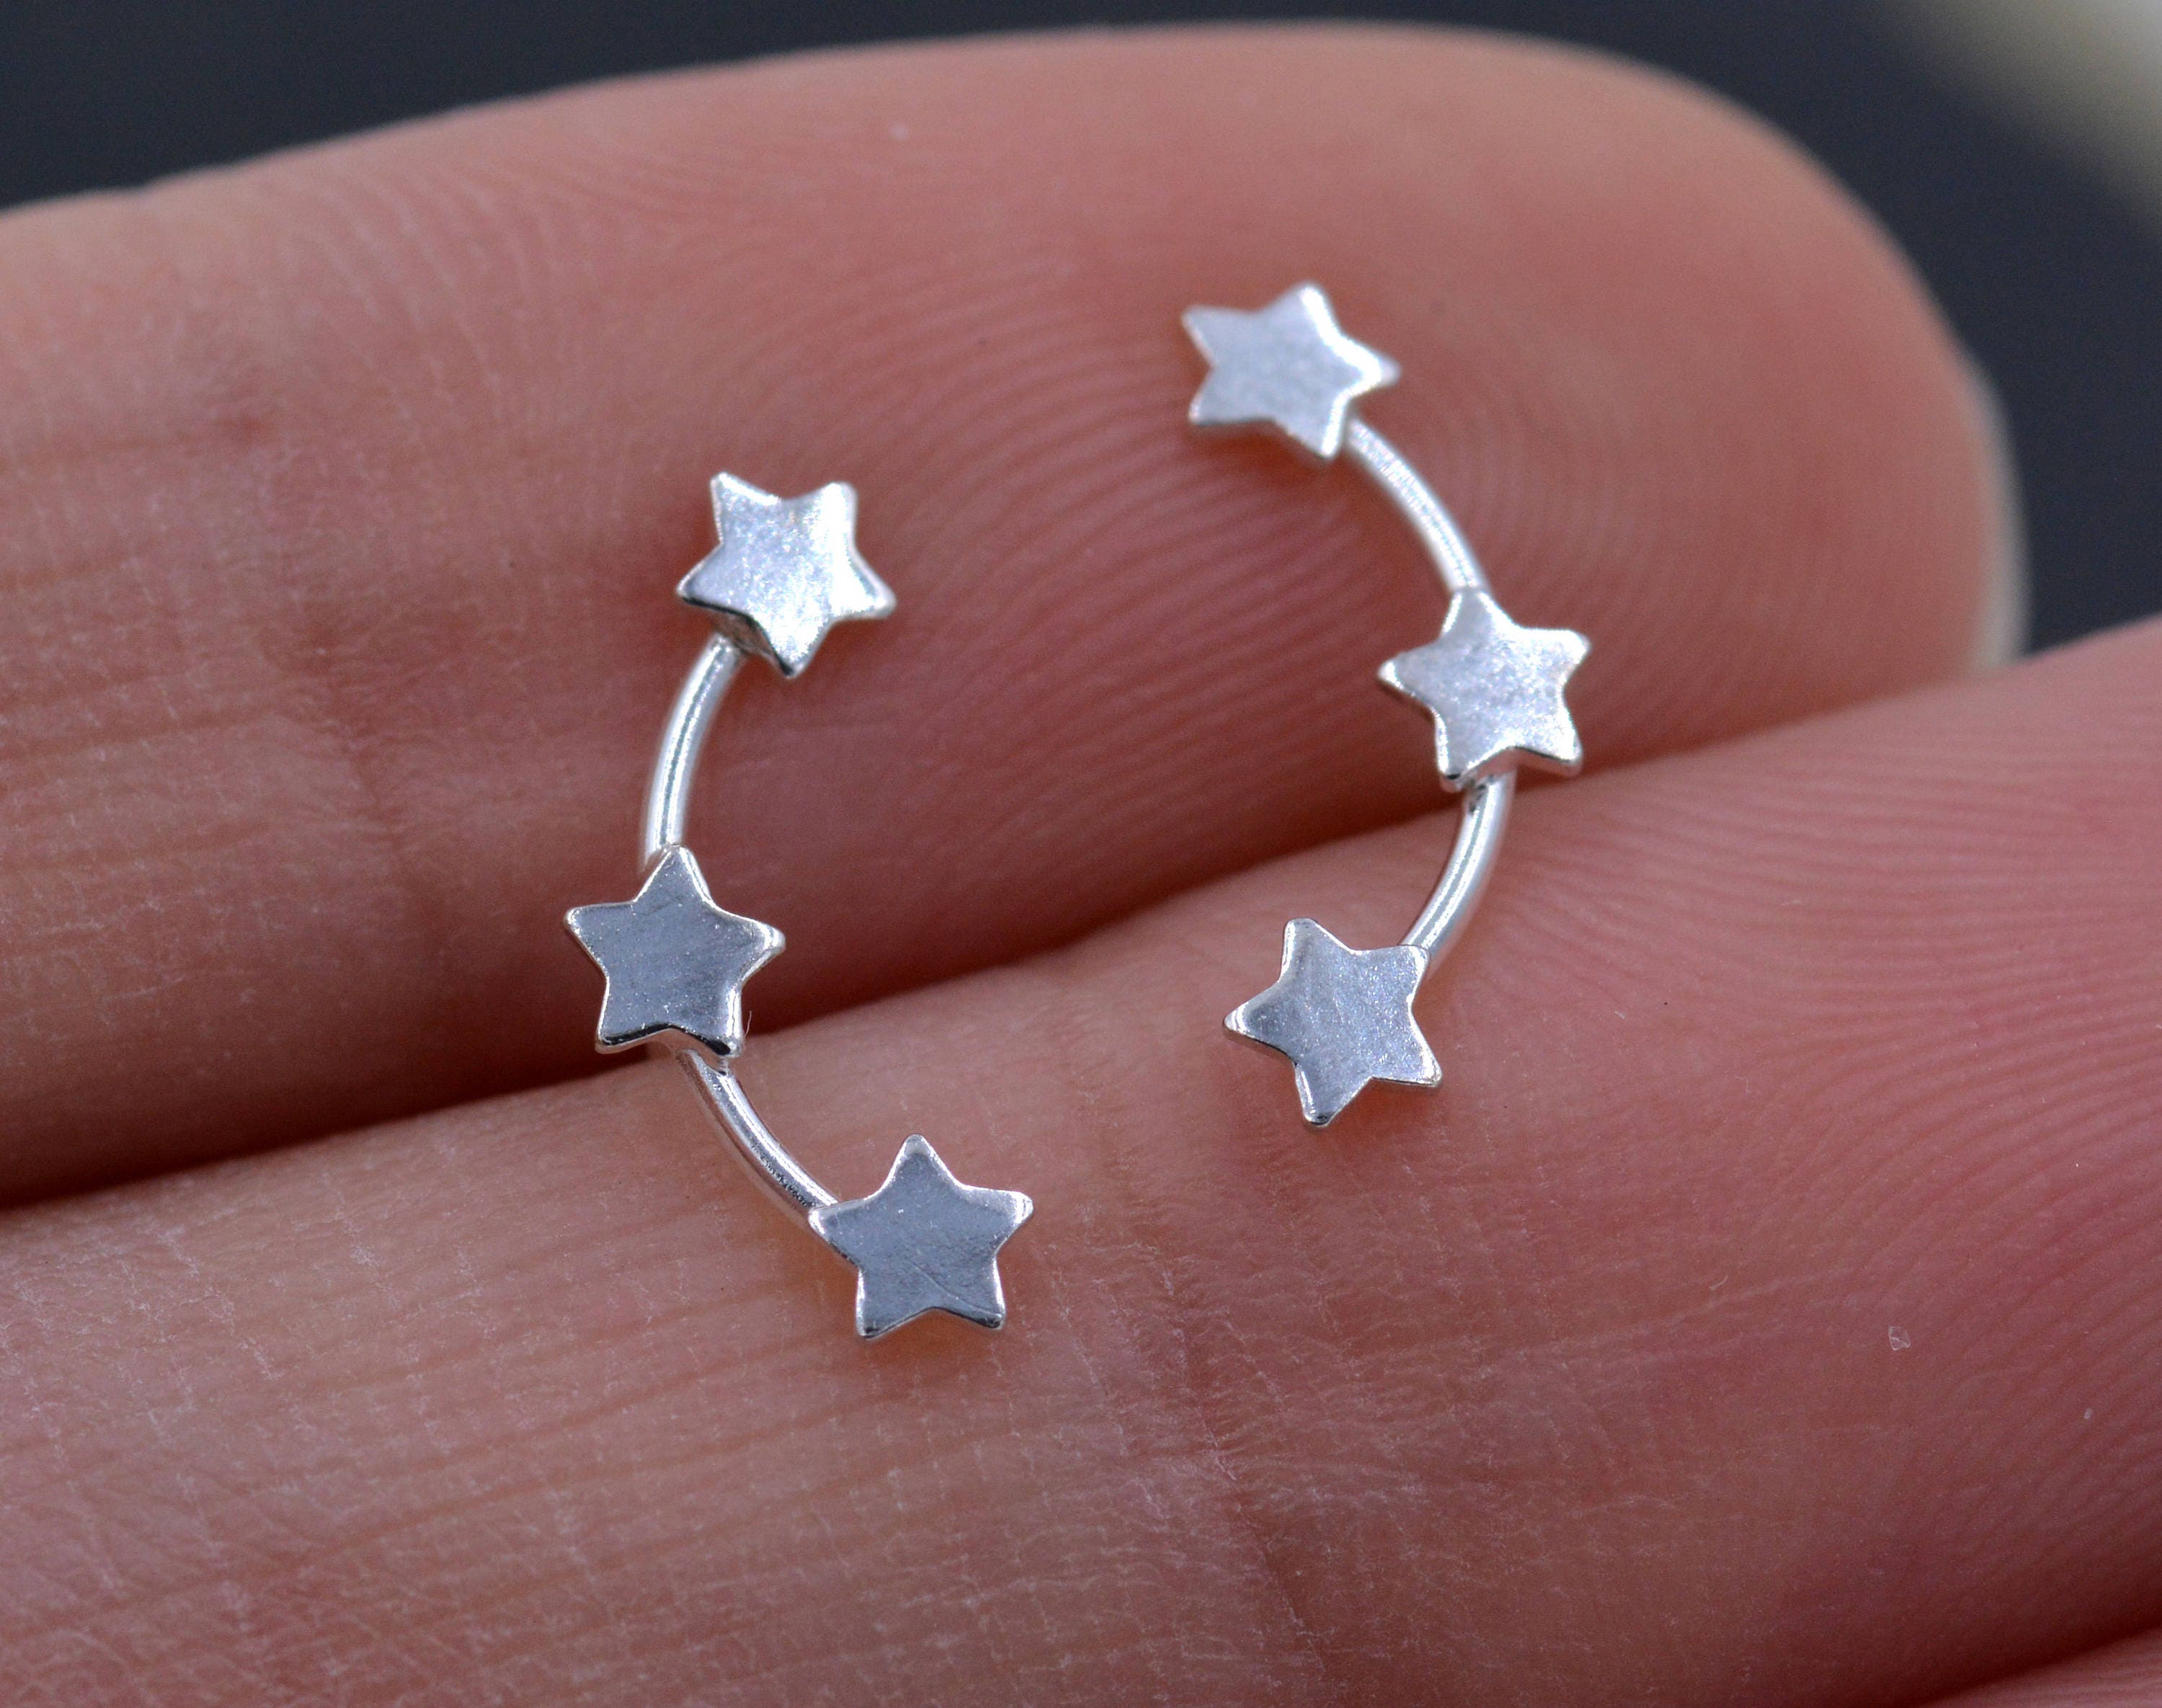 Sterling silver STAR stud earrings-Handmade-Minimalist jewelry-Small post earrings-Lightweight-Everyday wear-Gifts for her-Polished finish